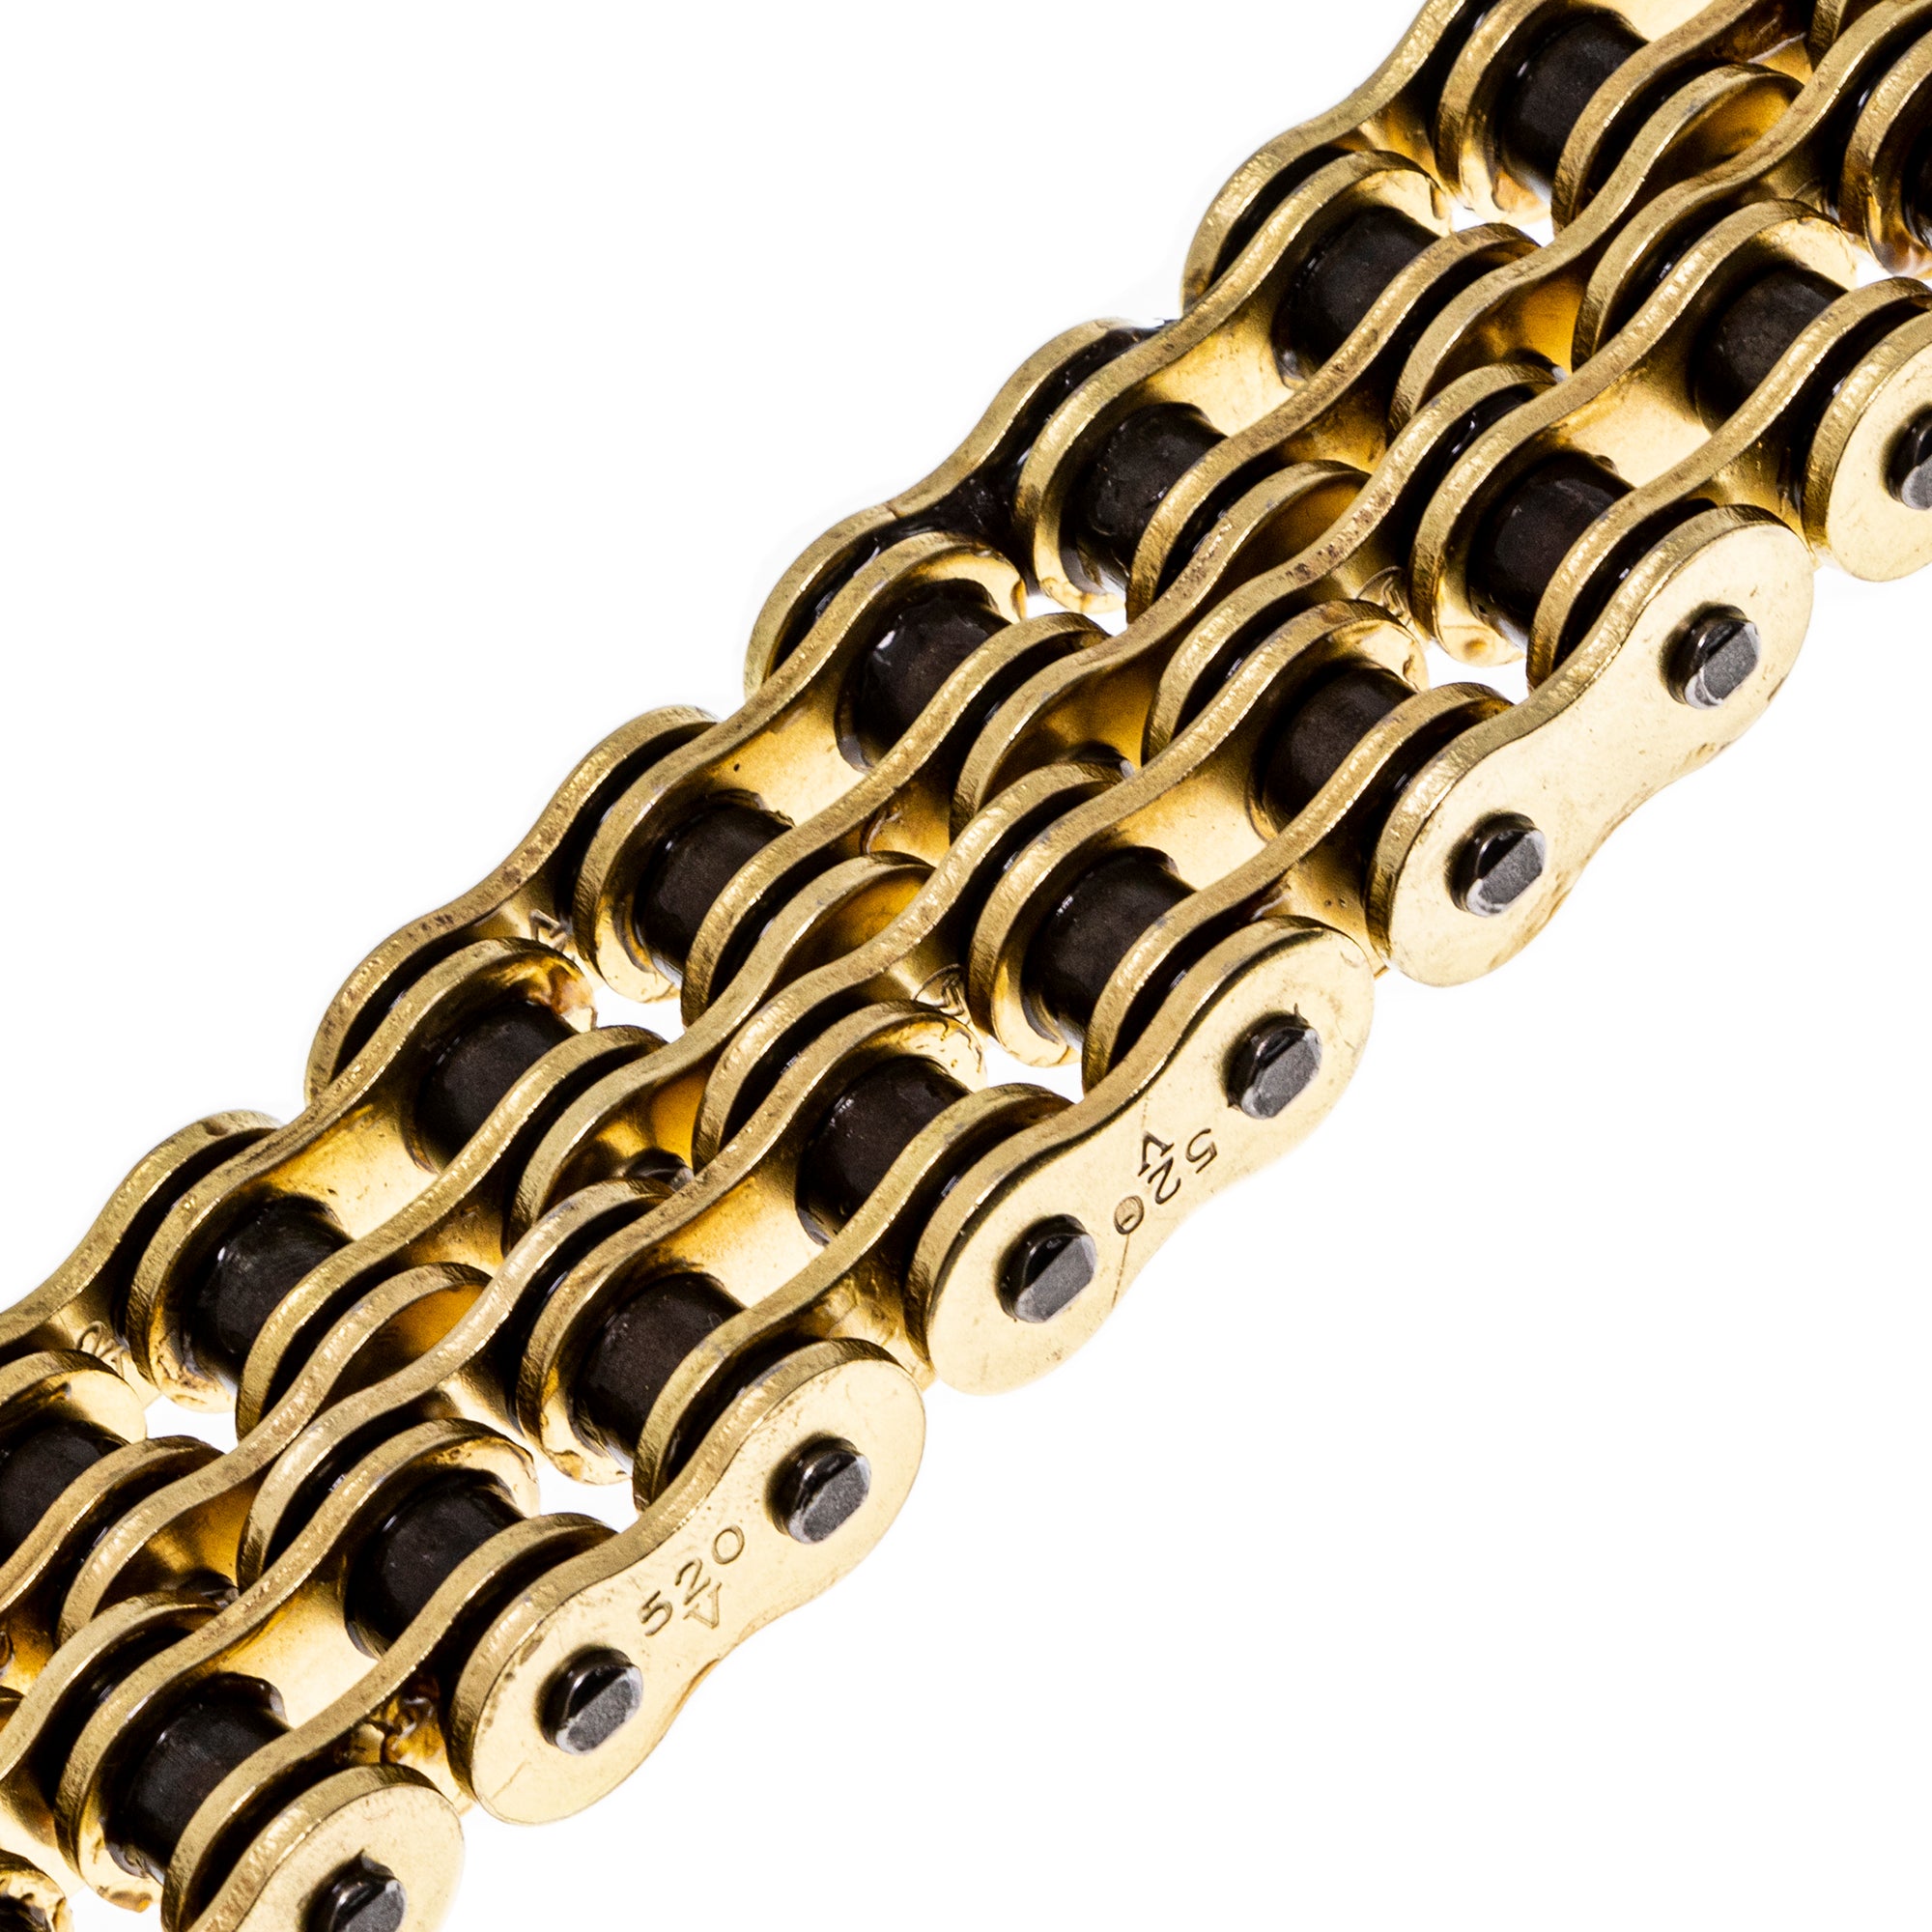 Gold X-Ring Chain 74 w/ Master Link for zOTHER Yamaha Polaris Trail Scrambler Grizzly NICHE 519-CDC2581H